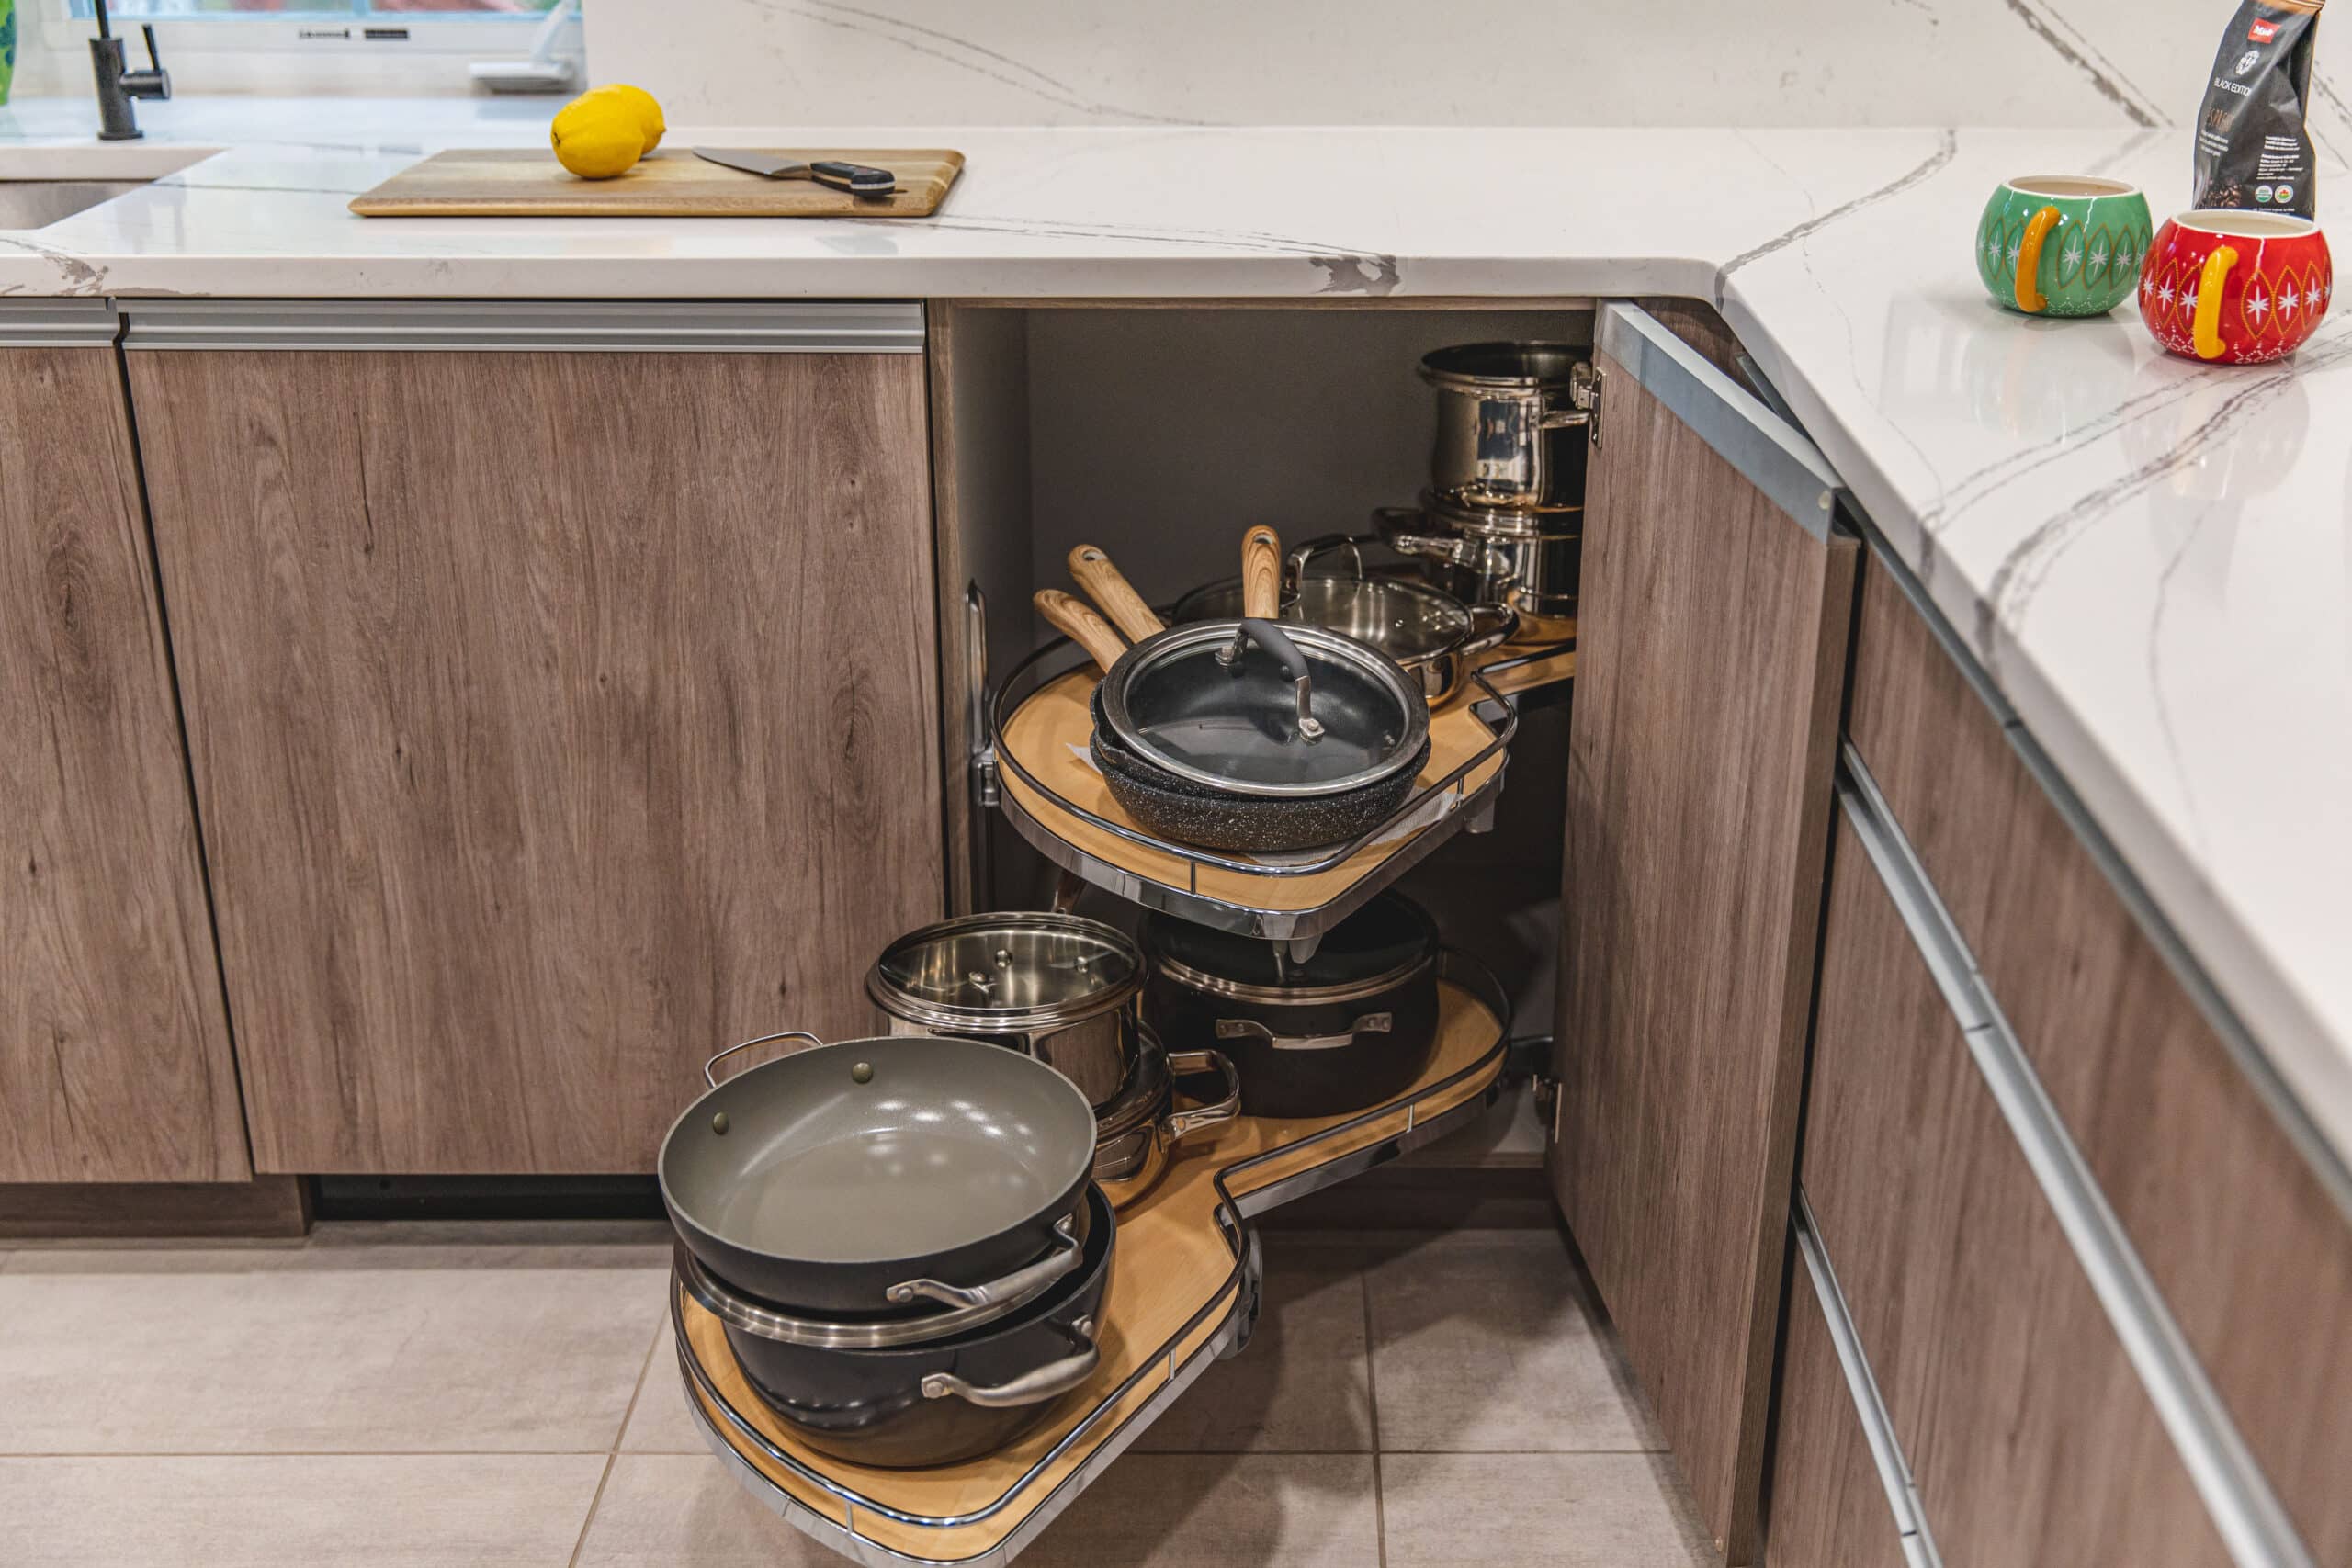 A cluttered kitchen counter with various pots and pans neatly arranged,